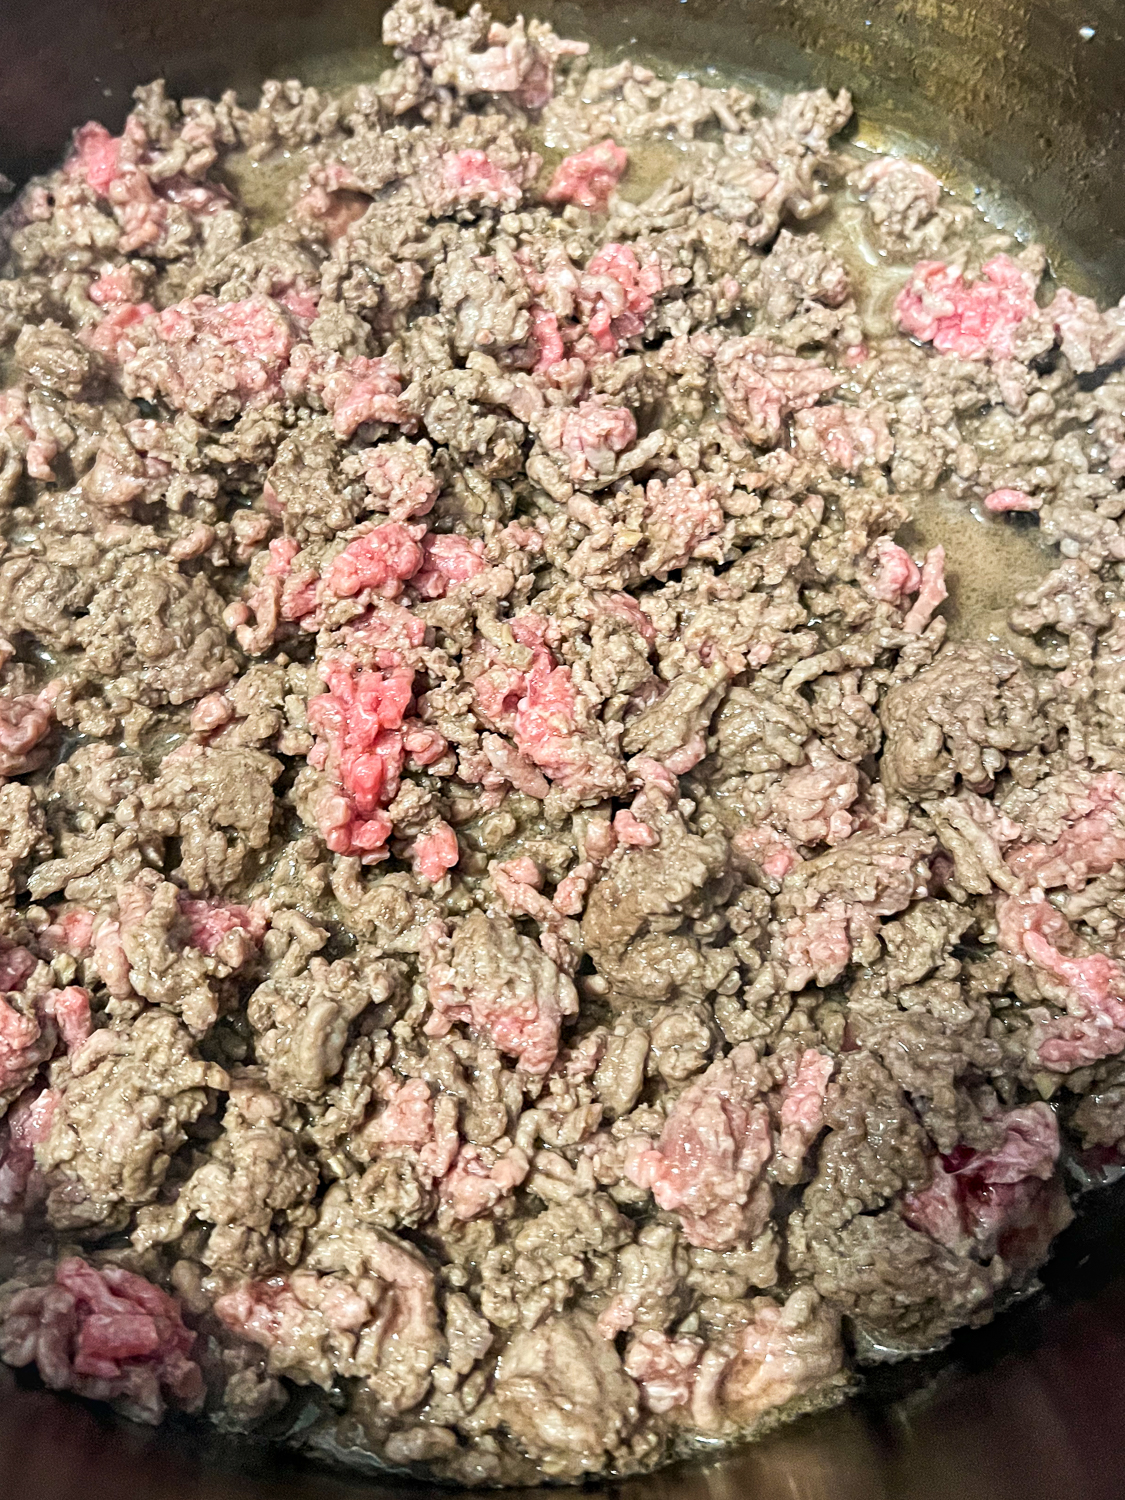 Ground beef browning in a Dutch oven partially cooked.